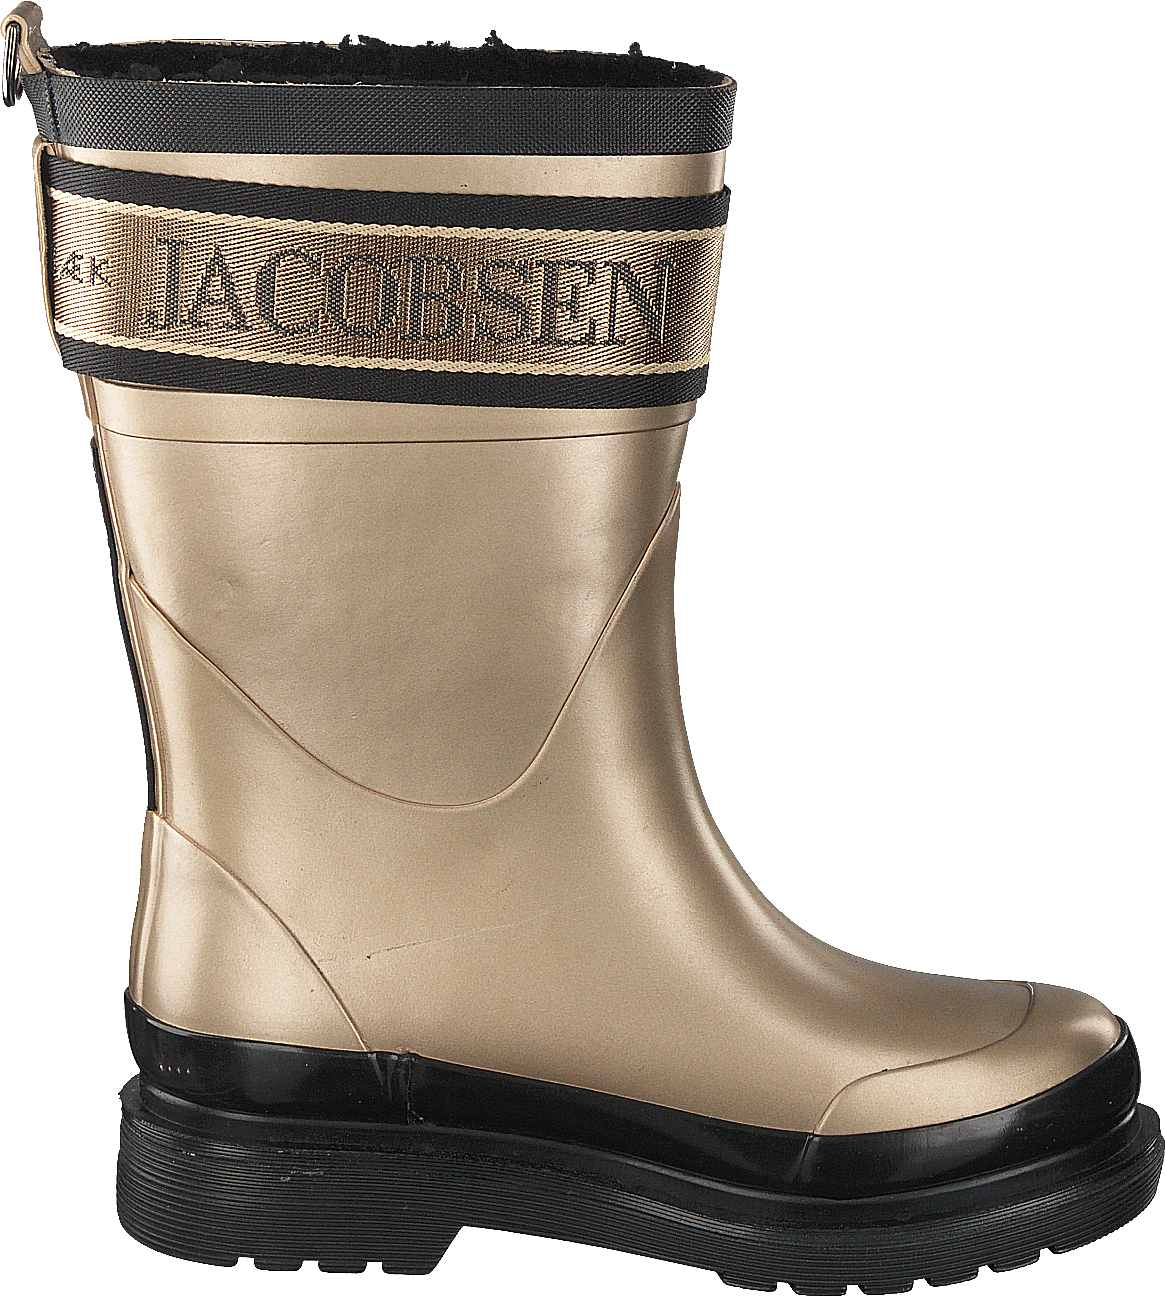 3/4 Rubber Boots Platin